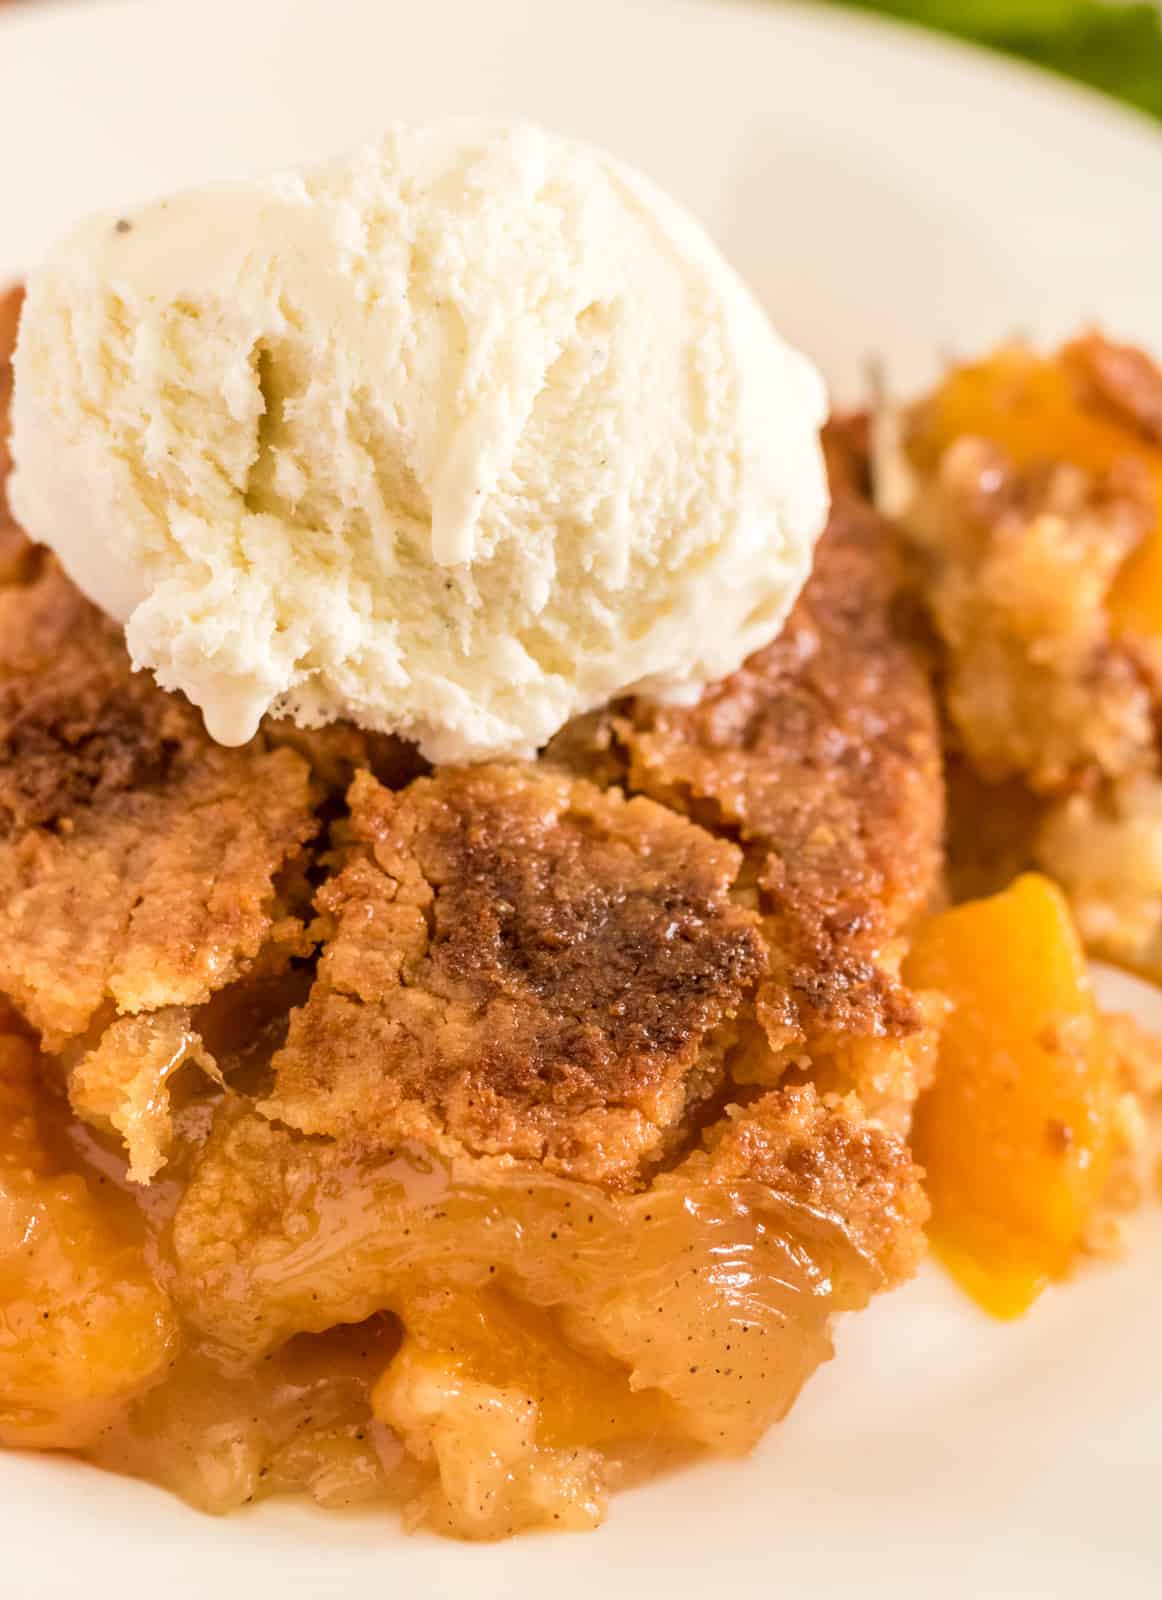 Close up of dump cake plate showing the cooked peaches and crispy cake topping